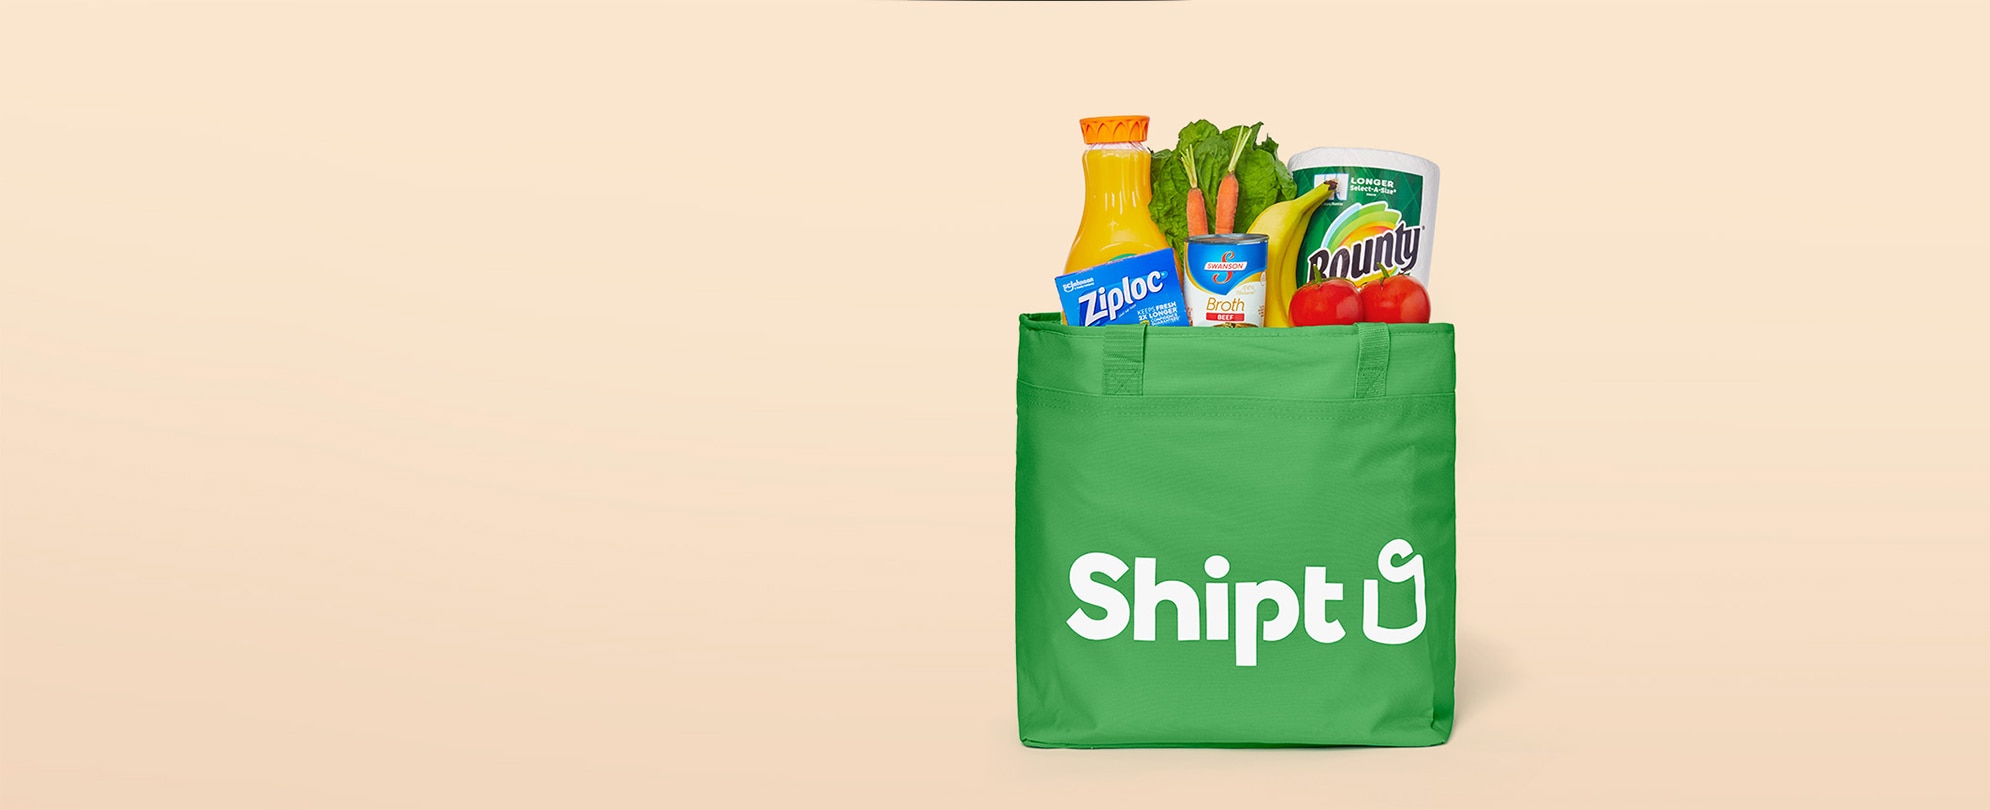 A bag featuring the Shipt logo, filled with groceries.